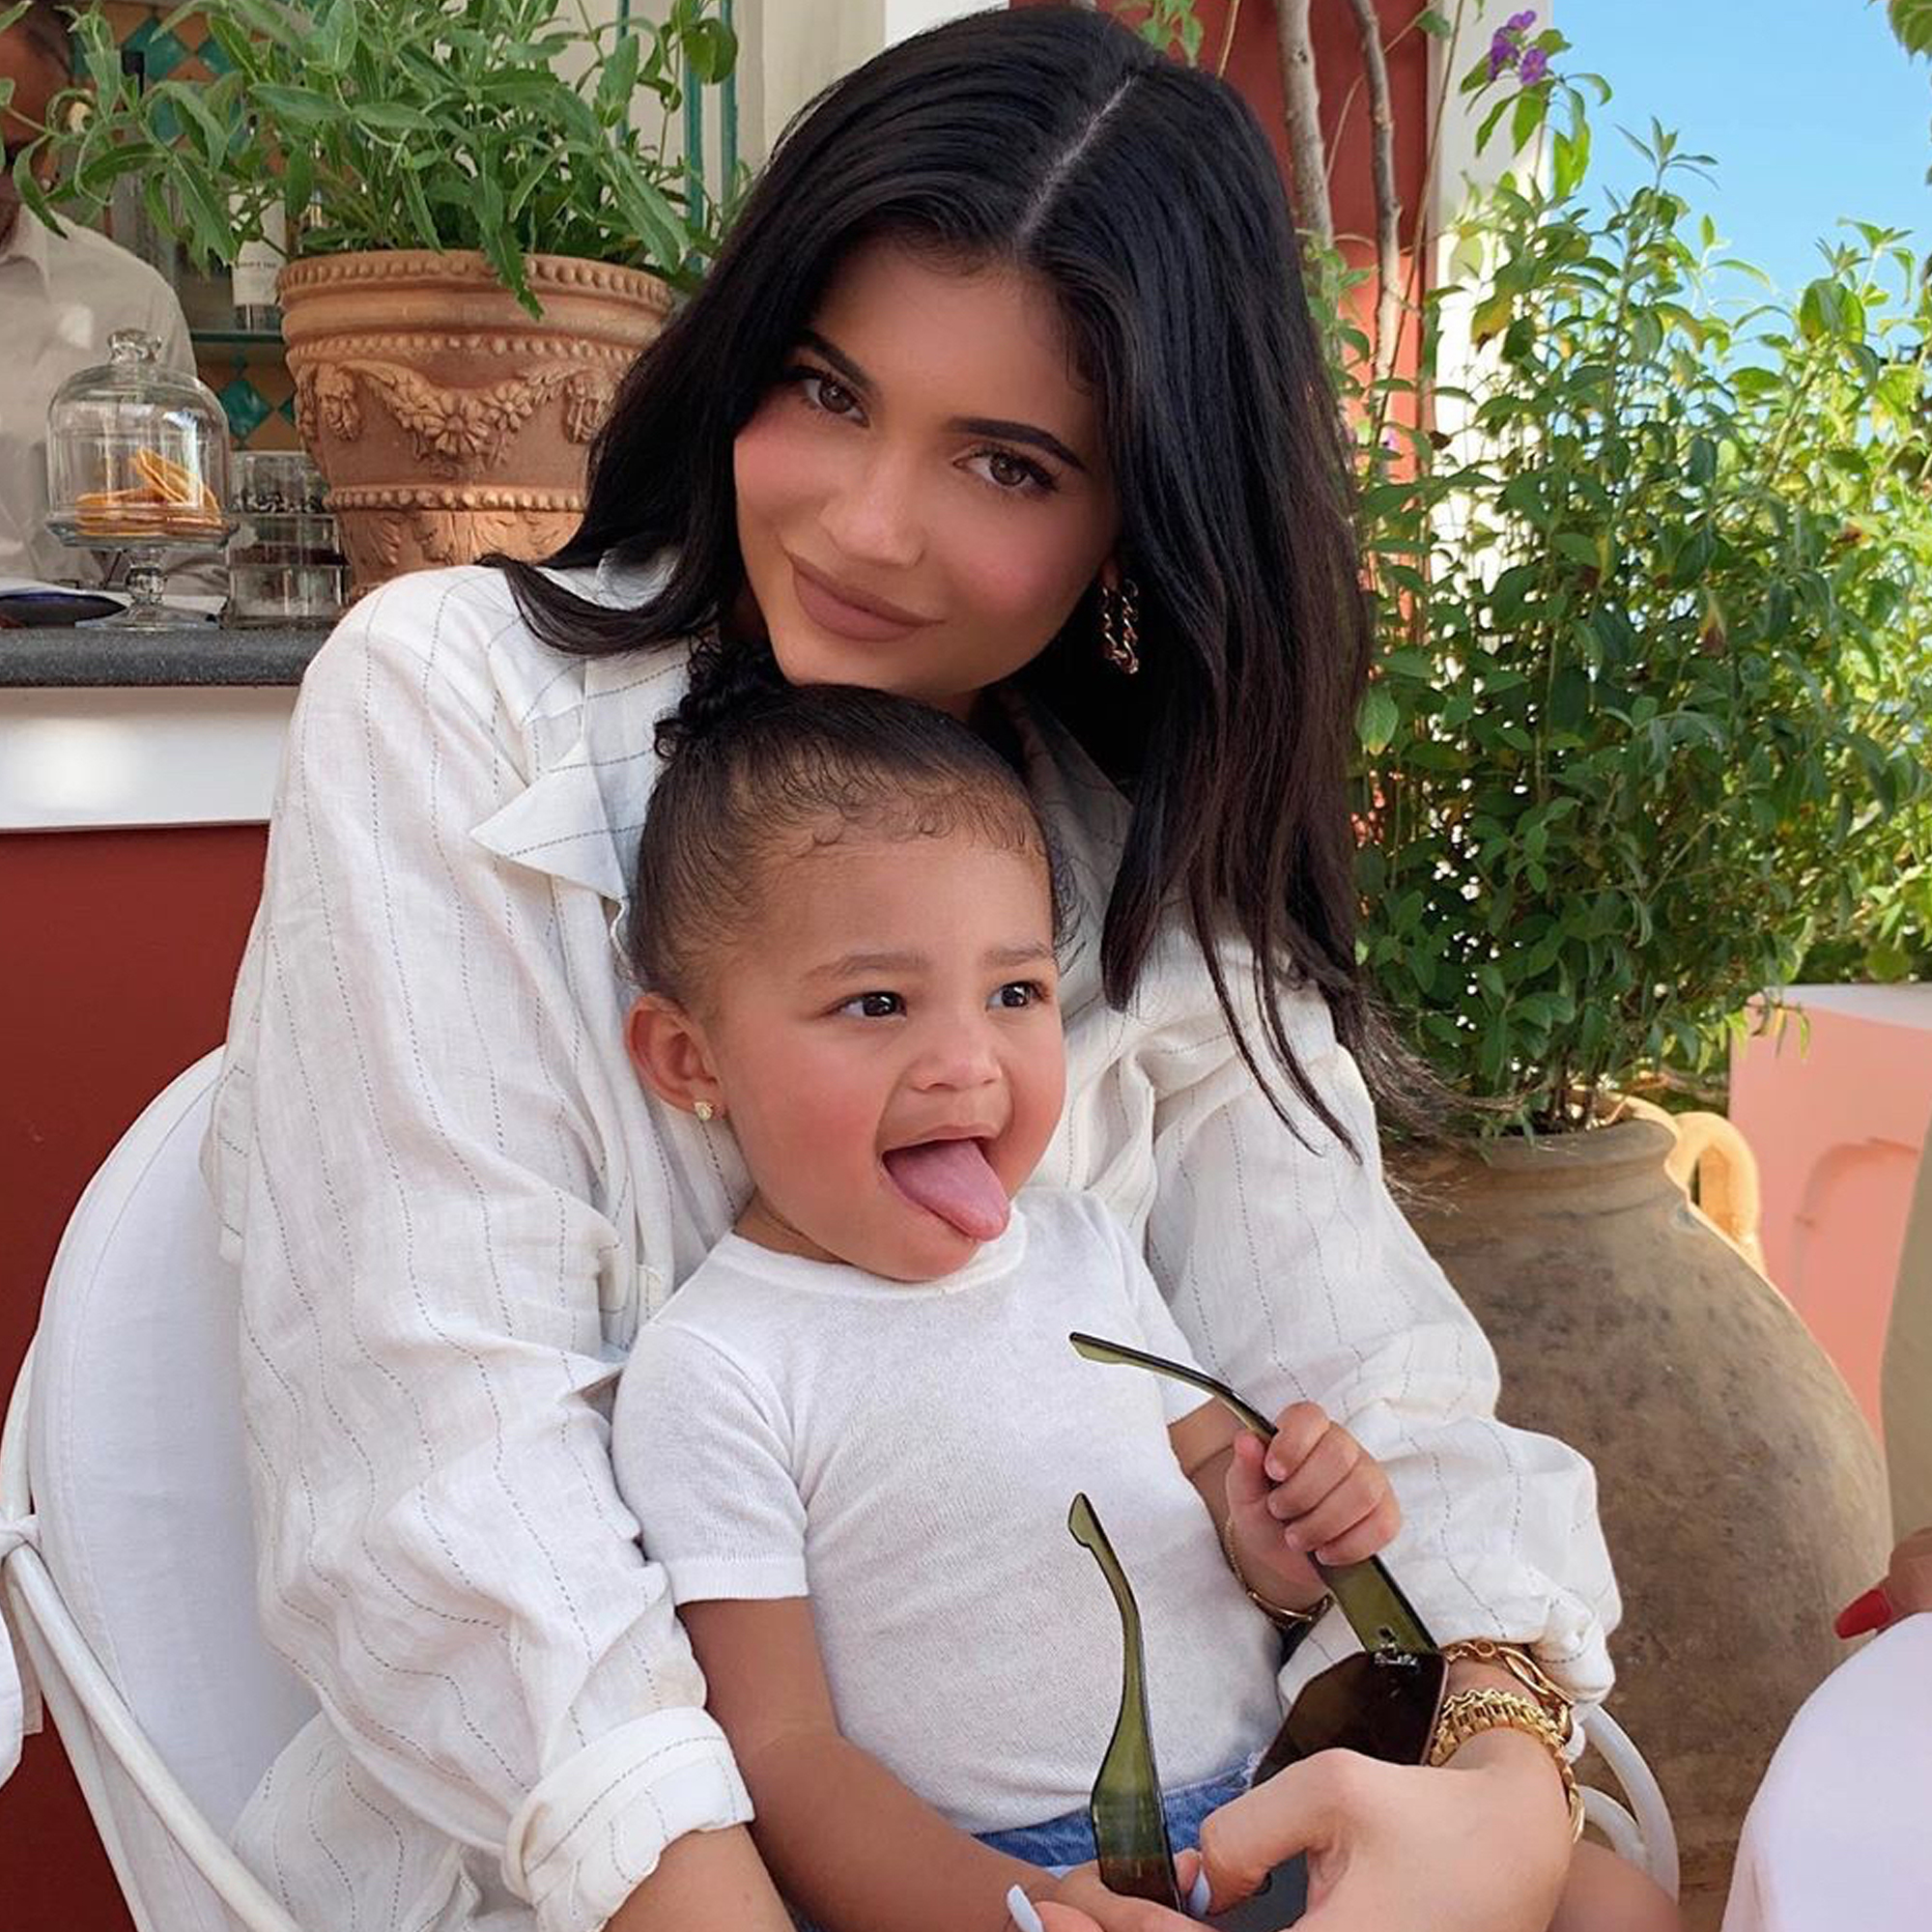 Kylie-Jenner-spends-200000-on-pony-for-daughter-Stormi-1